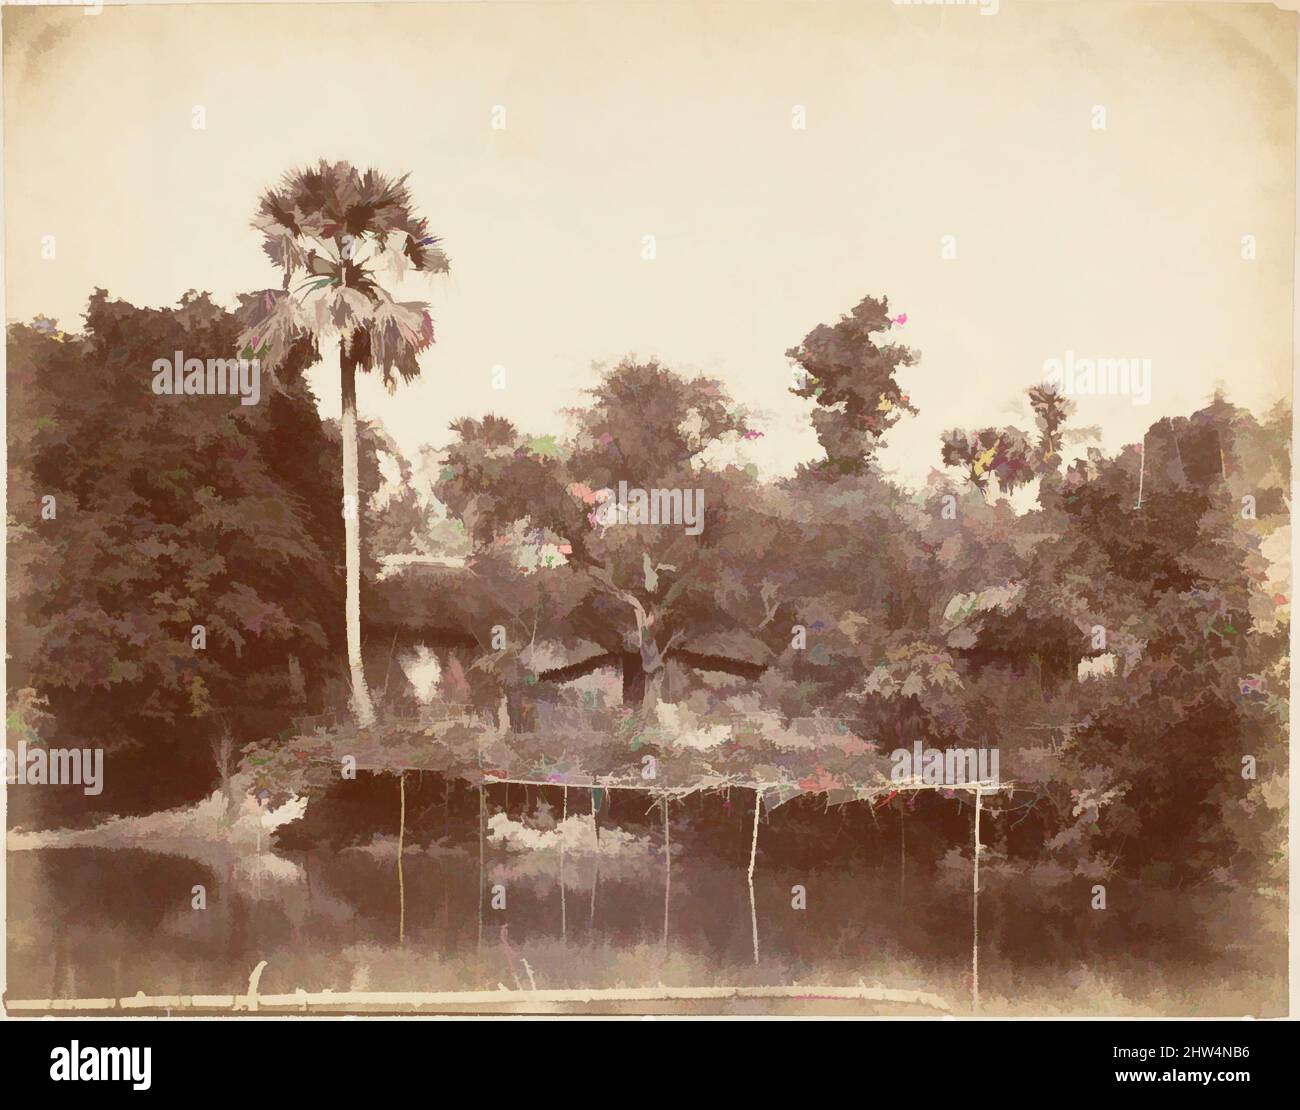 Art inspired by View in the Jungle, Bengal, 1850s, Albumen silver print, Image: 19.4 x 24.5 cm (7 5/8 x 9 5/8 in.), Photographs, Captain R. B. Hill, Classic works modernized by Artotop with a splash of modernity. Shapes, color and value, eye-catching visual impact on art. Emotions through freedom of artworks in a contemporary way. A timeless message pursuing a wildly creative new direction. Artists turning to the digital medium and creating the Artotop NFT Stock Photo